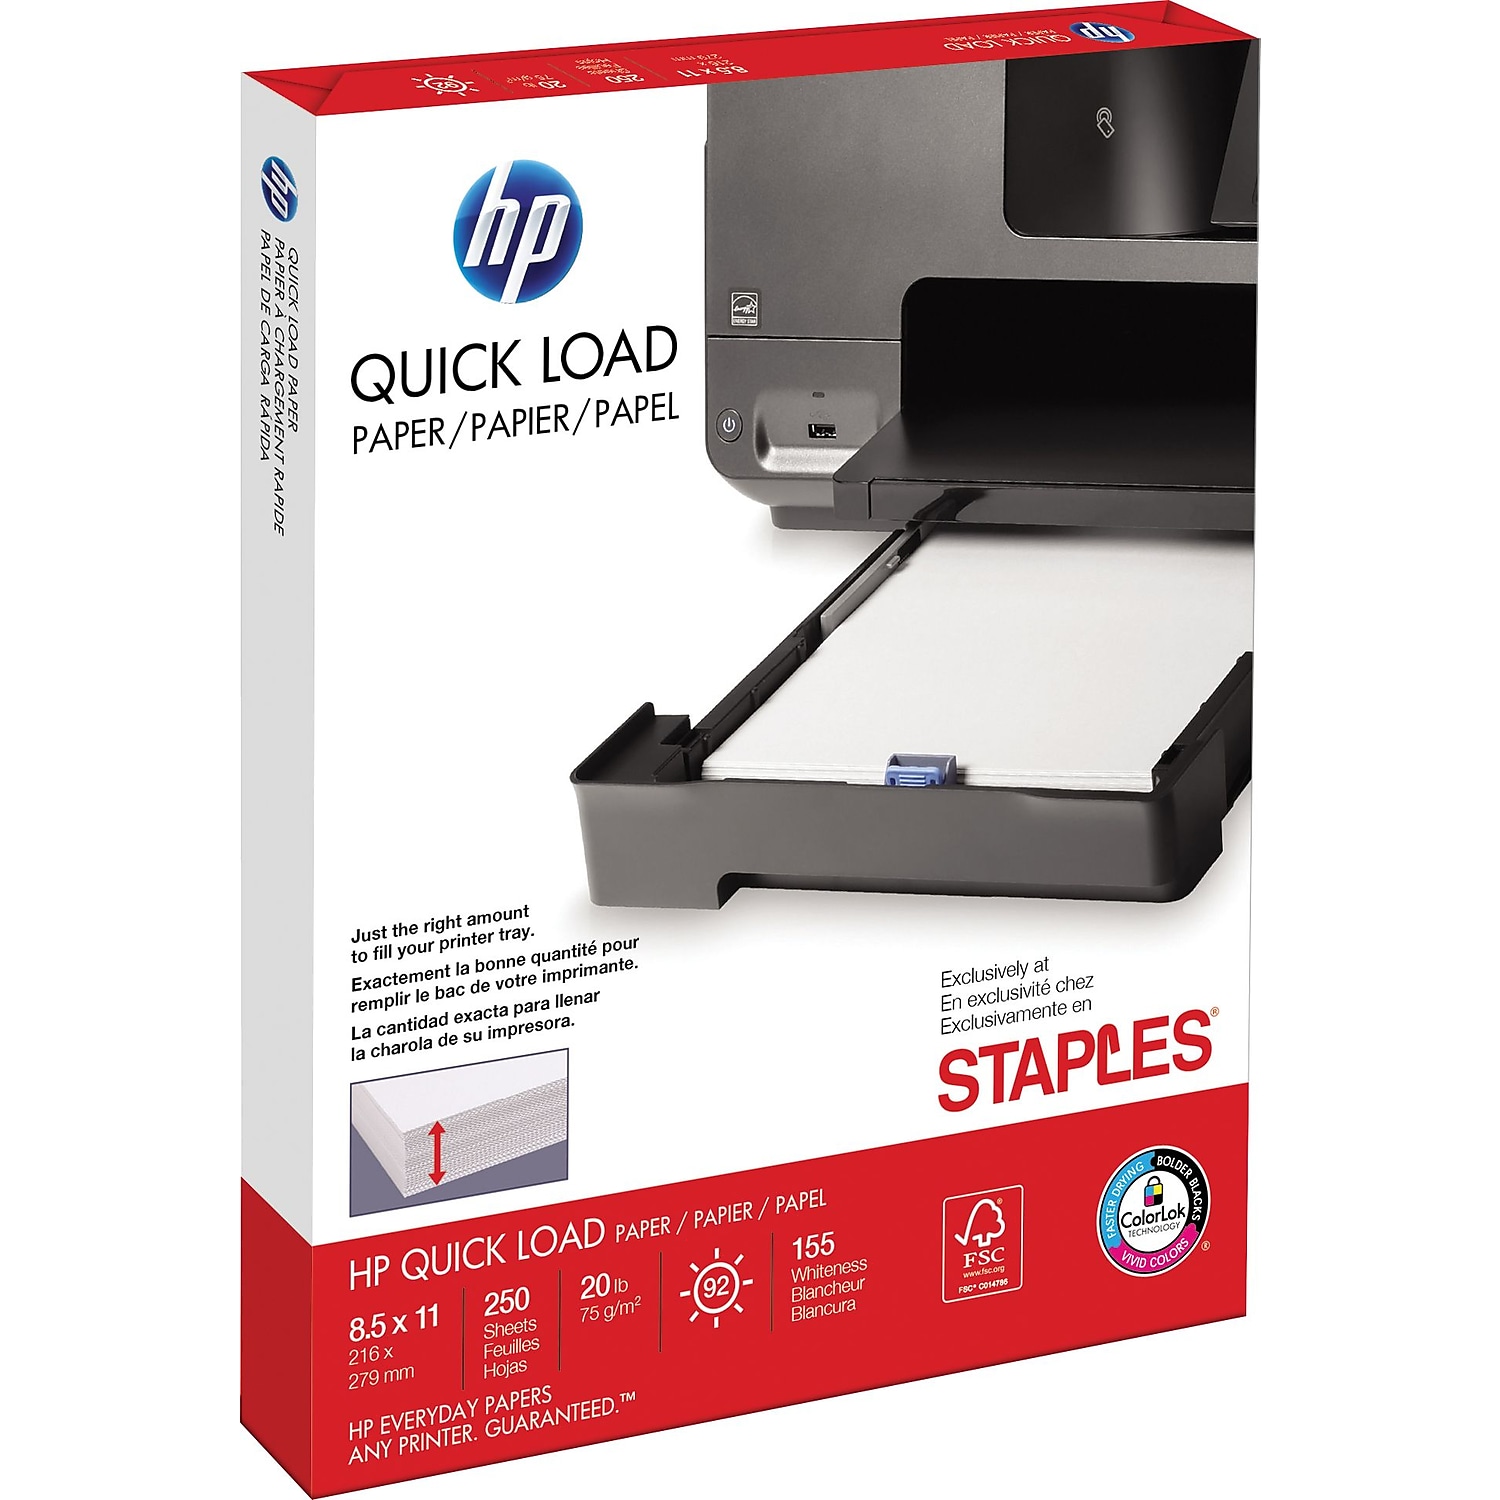 HP Quick Load 8.5" x 11" Paper, 20 lbs., 250 Sheets/Ream (28088)  $1.85 Staples Free Ship for Plus or Store Pick up